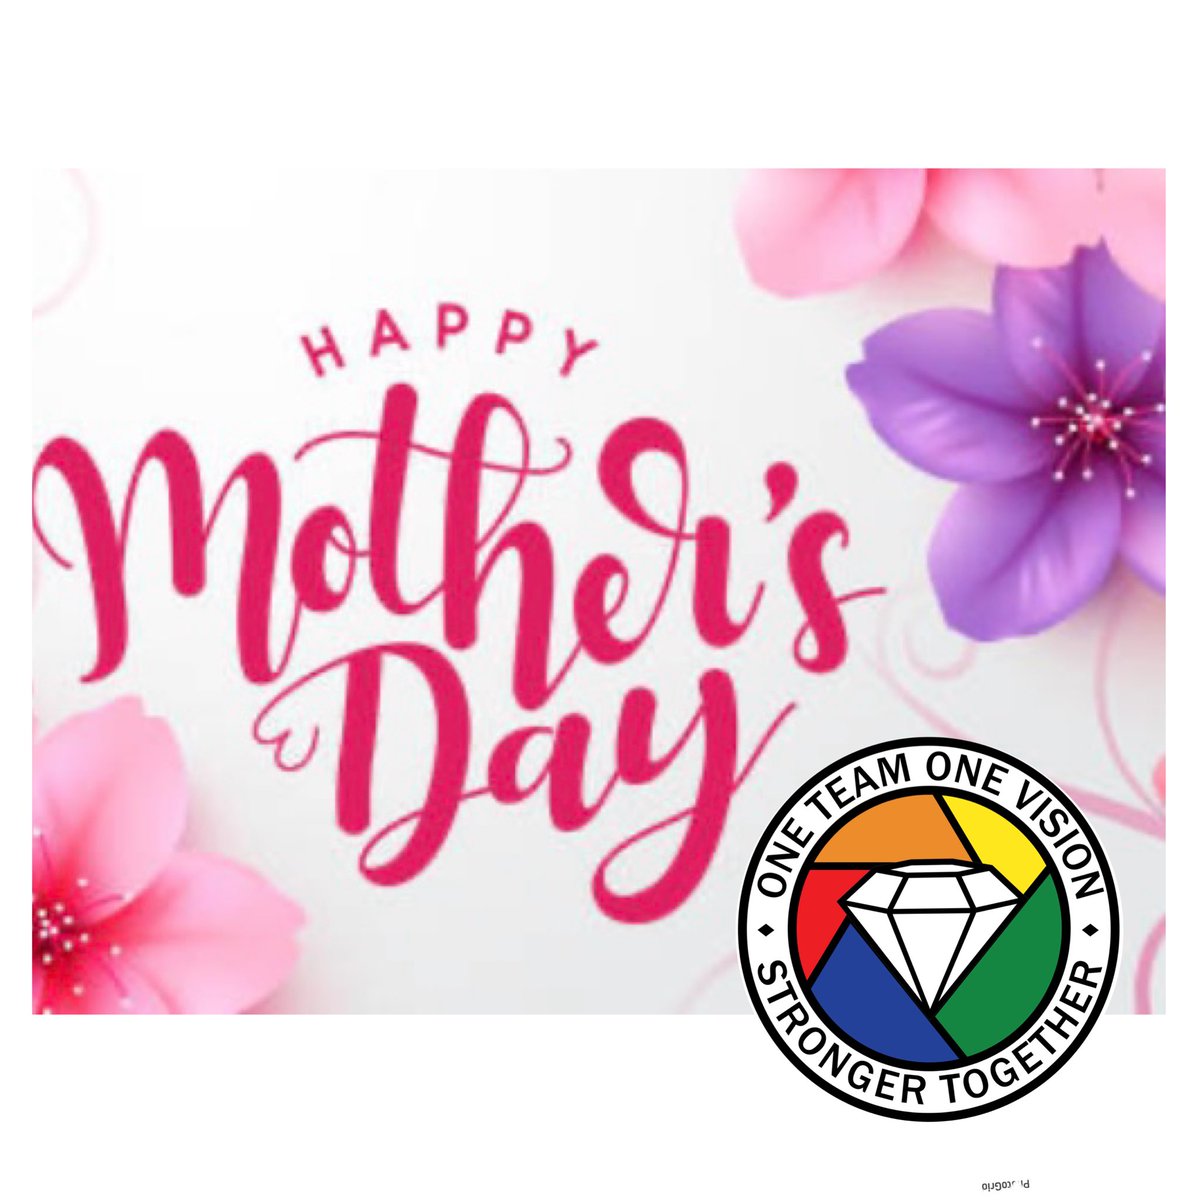 Happy Mother's Day to all the incredible mothers in the La Habra City School District community! Your strength, love, and dedication inspire us every day. Enjoy this special day dedicated to celebrating you! #LHCSD #MothersDay #LHCSDbelieves